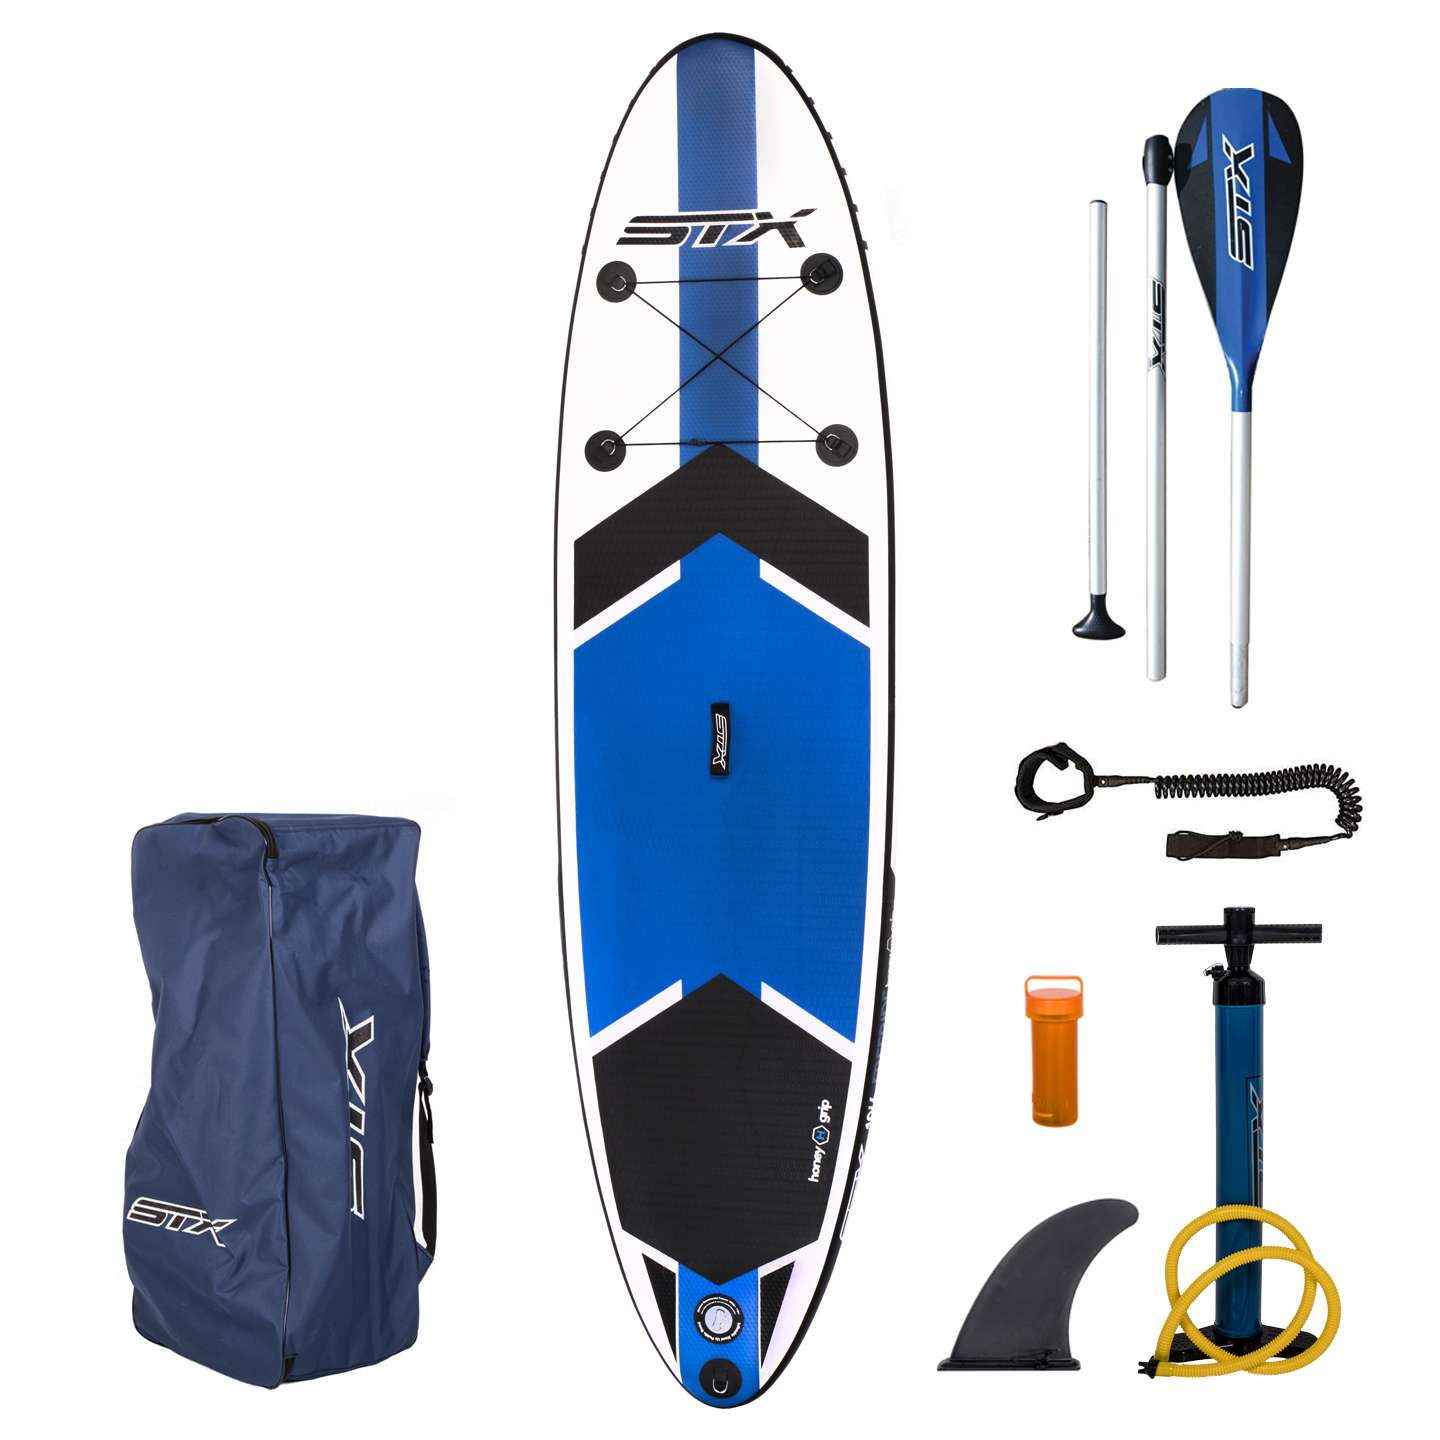 STX 10'6 Inflatable SUP Board 2017 | King of Watersports